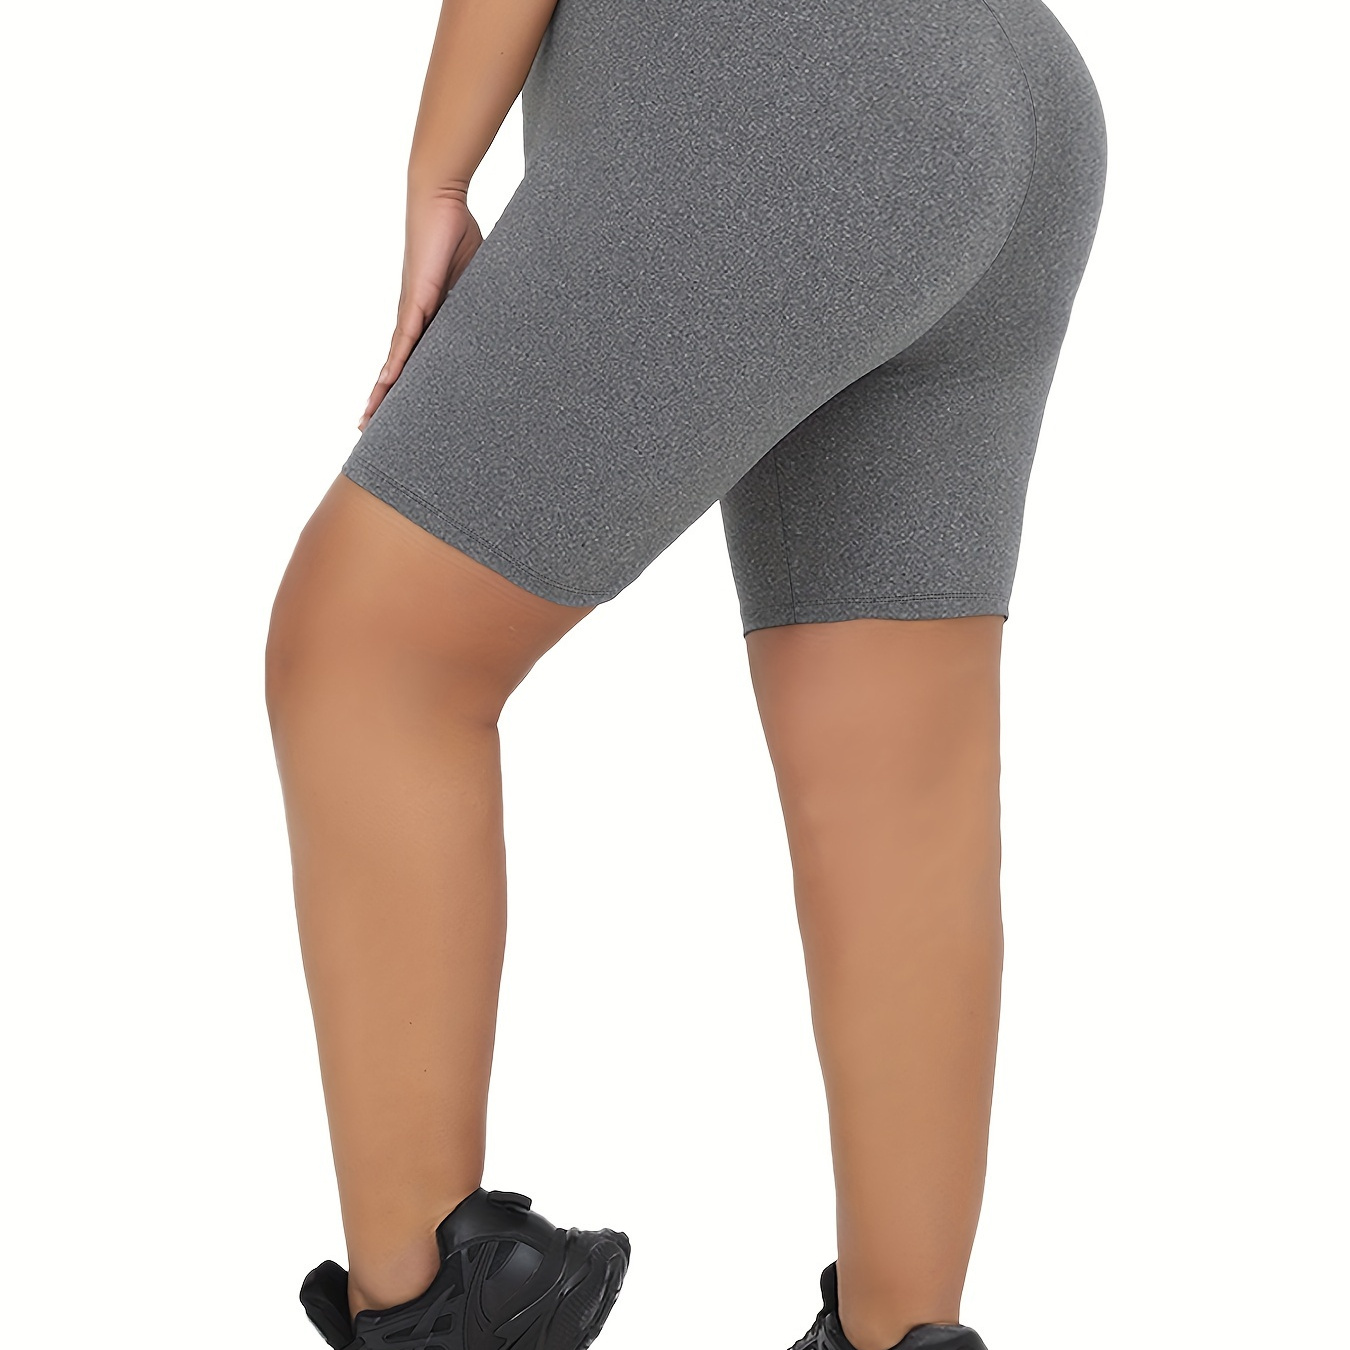 

Women's Sports Shorts, Plus Size High Rise Stretchy Soft & Comfy Workout Yoga Fitness Biker Shorts